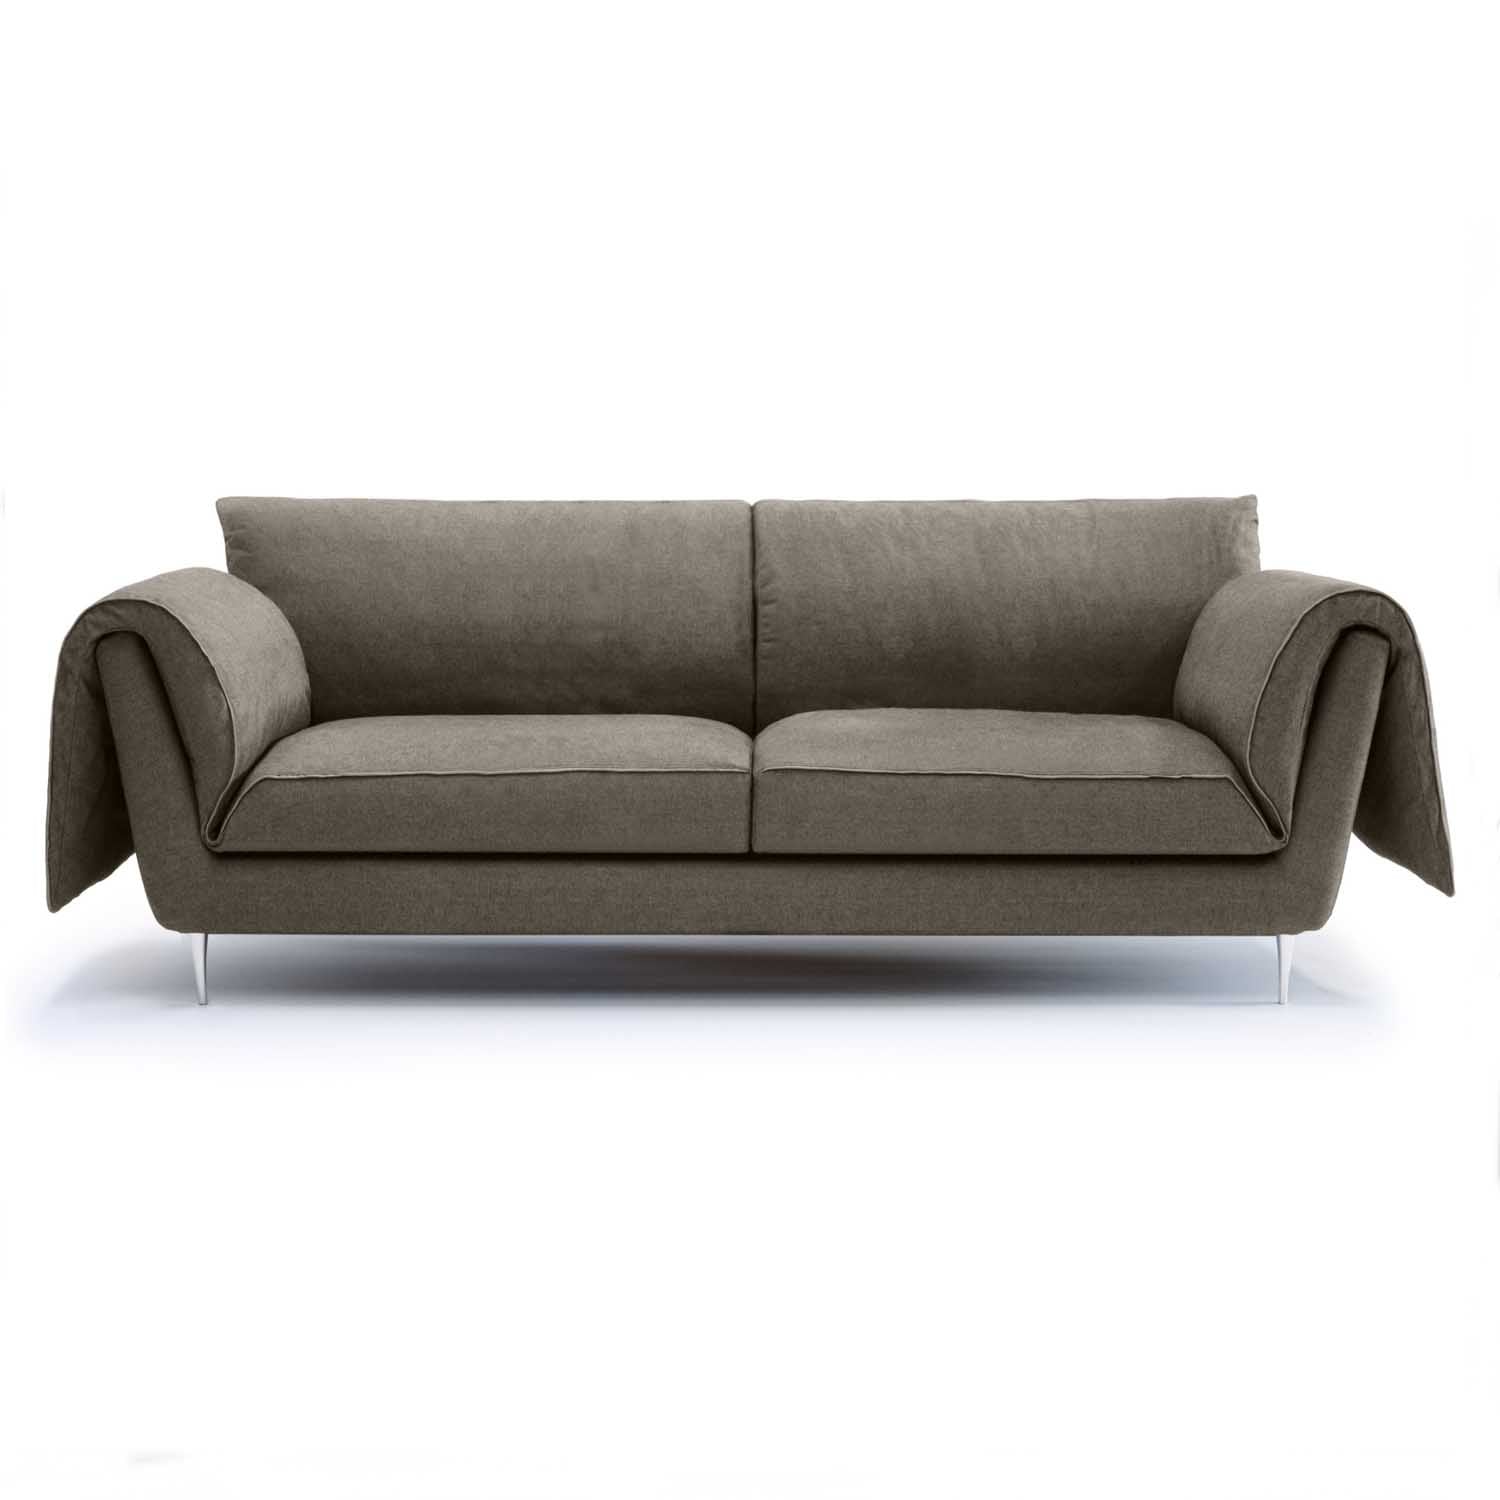 Experience Italian craftsmanship with Casquet. brown linen sofa.